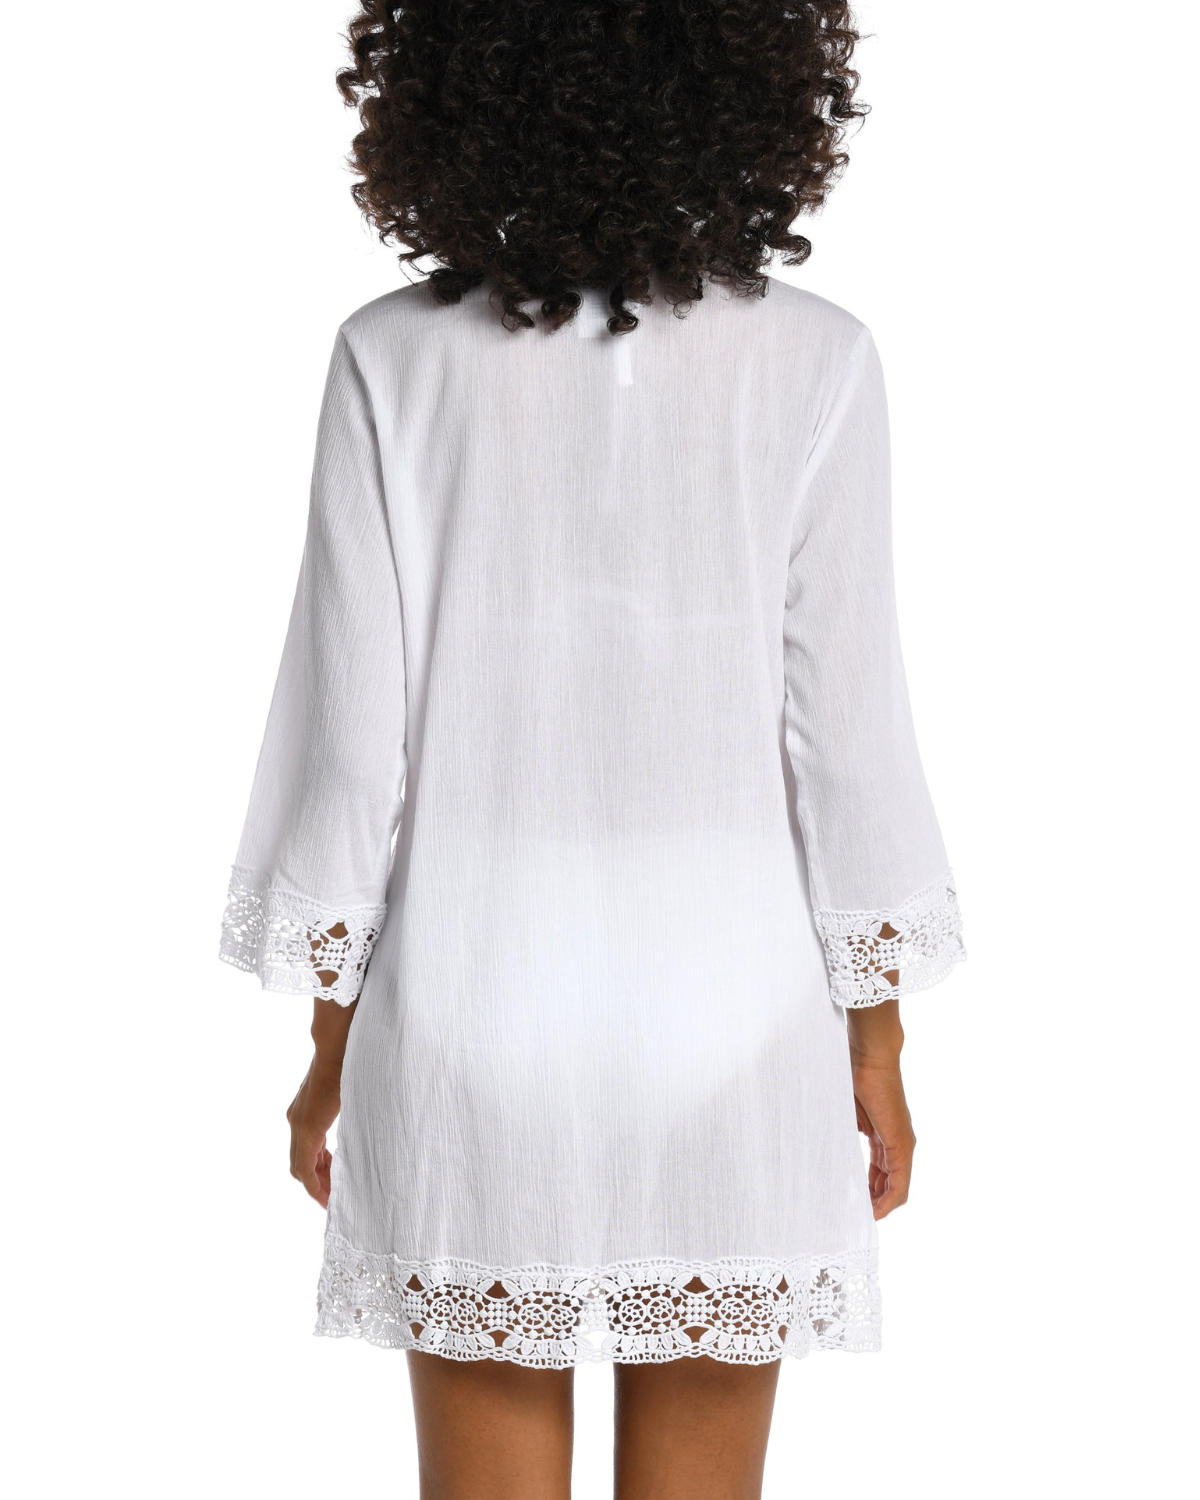 Model wearing a 3/4 sleeve v-neck tunic with a crochet trim in white